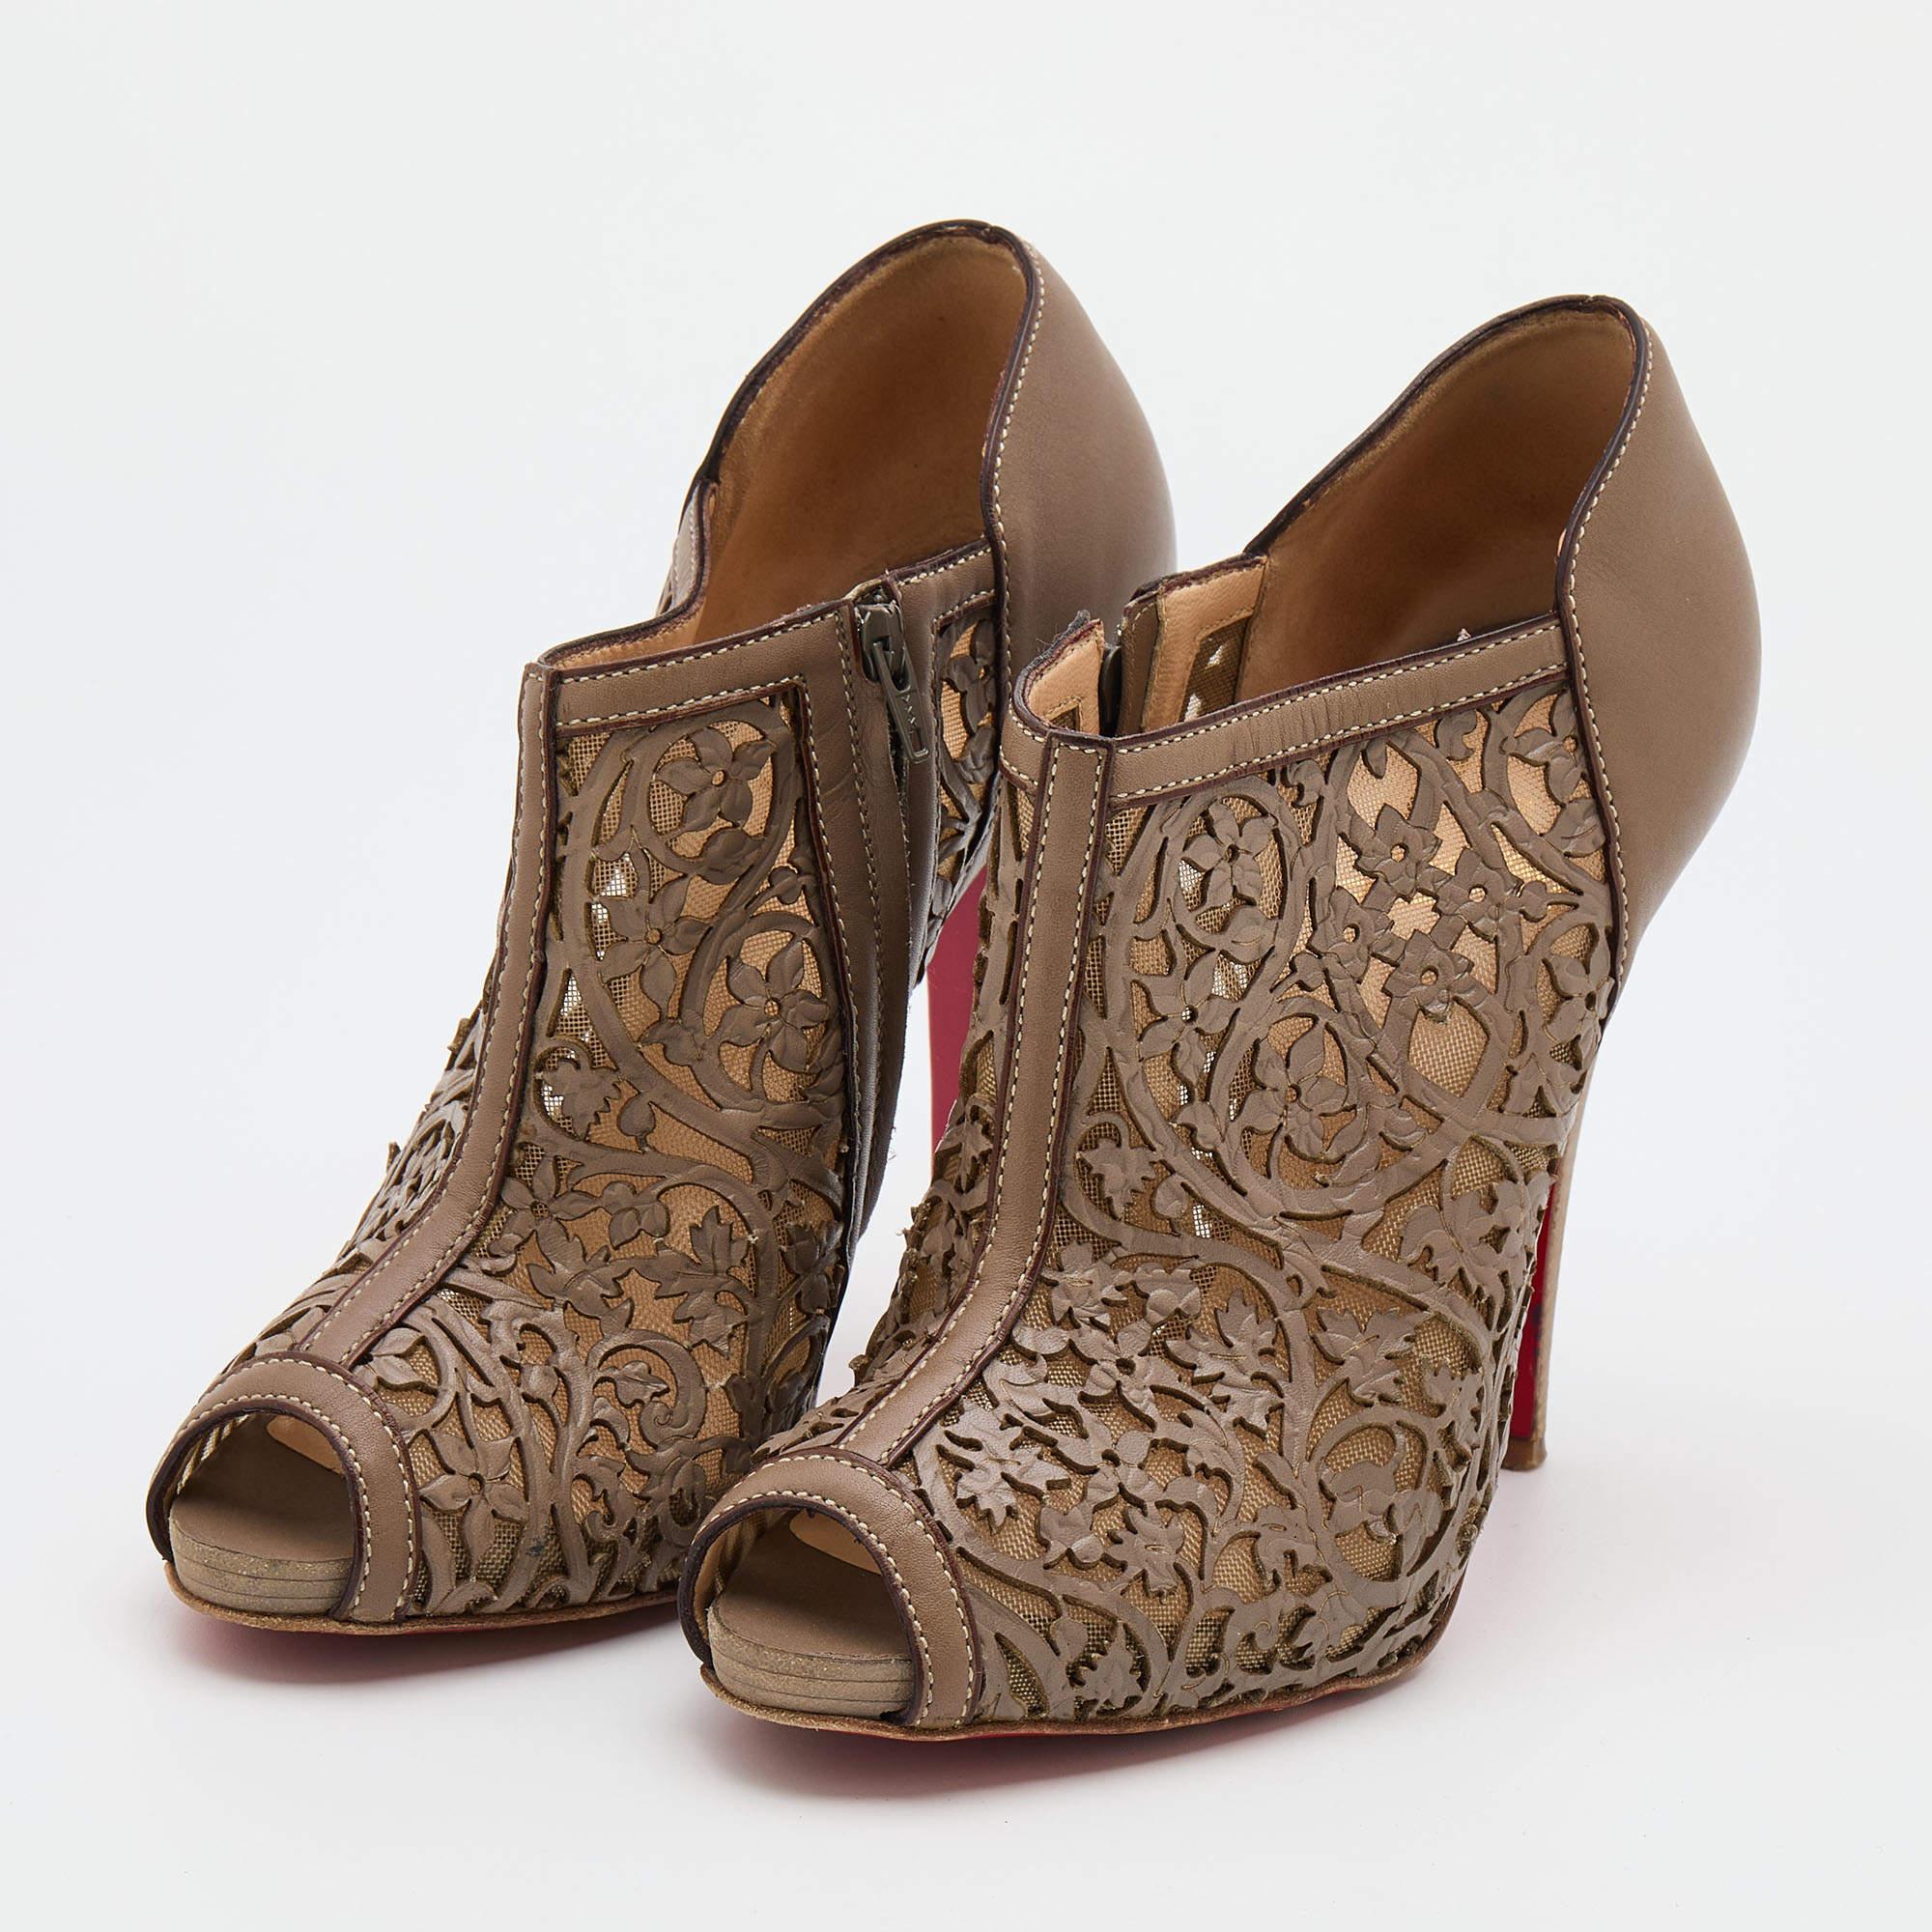 Christian Louboutin Grey Laser-Cut Leather Pampas Booties Size 36.5 In Good Condition For Sale In Dubai, Al Qouz 2